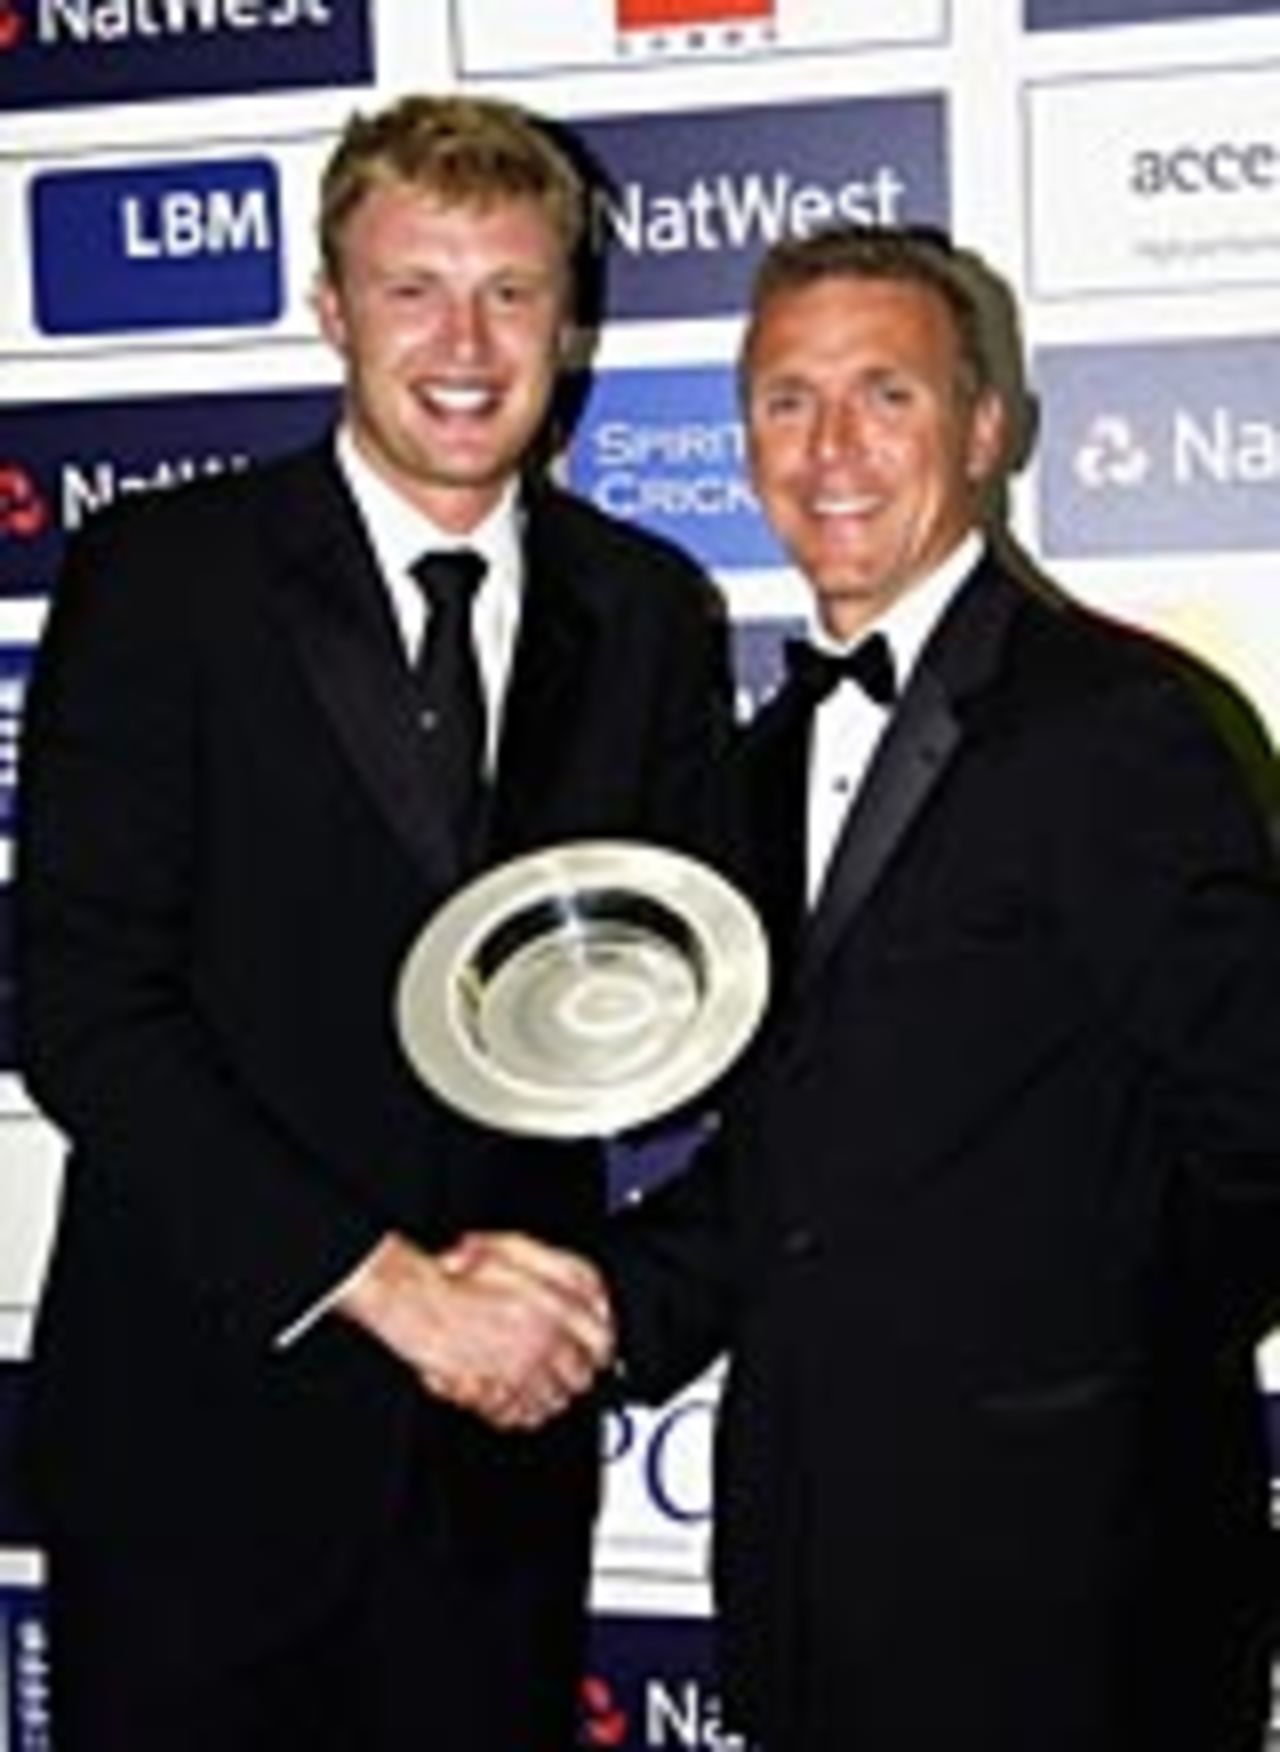 Alec Stewart presents Andrew Flintoff with the PCA Player of the Year award, September 20, 2004